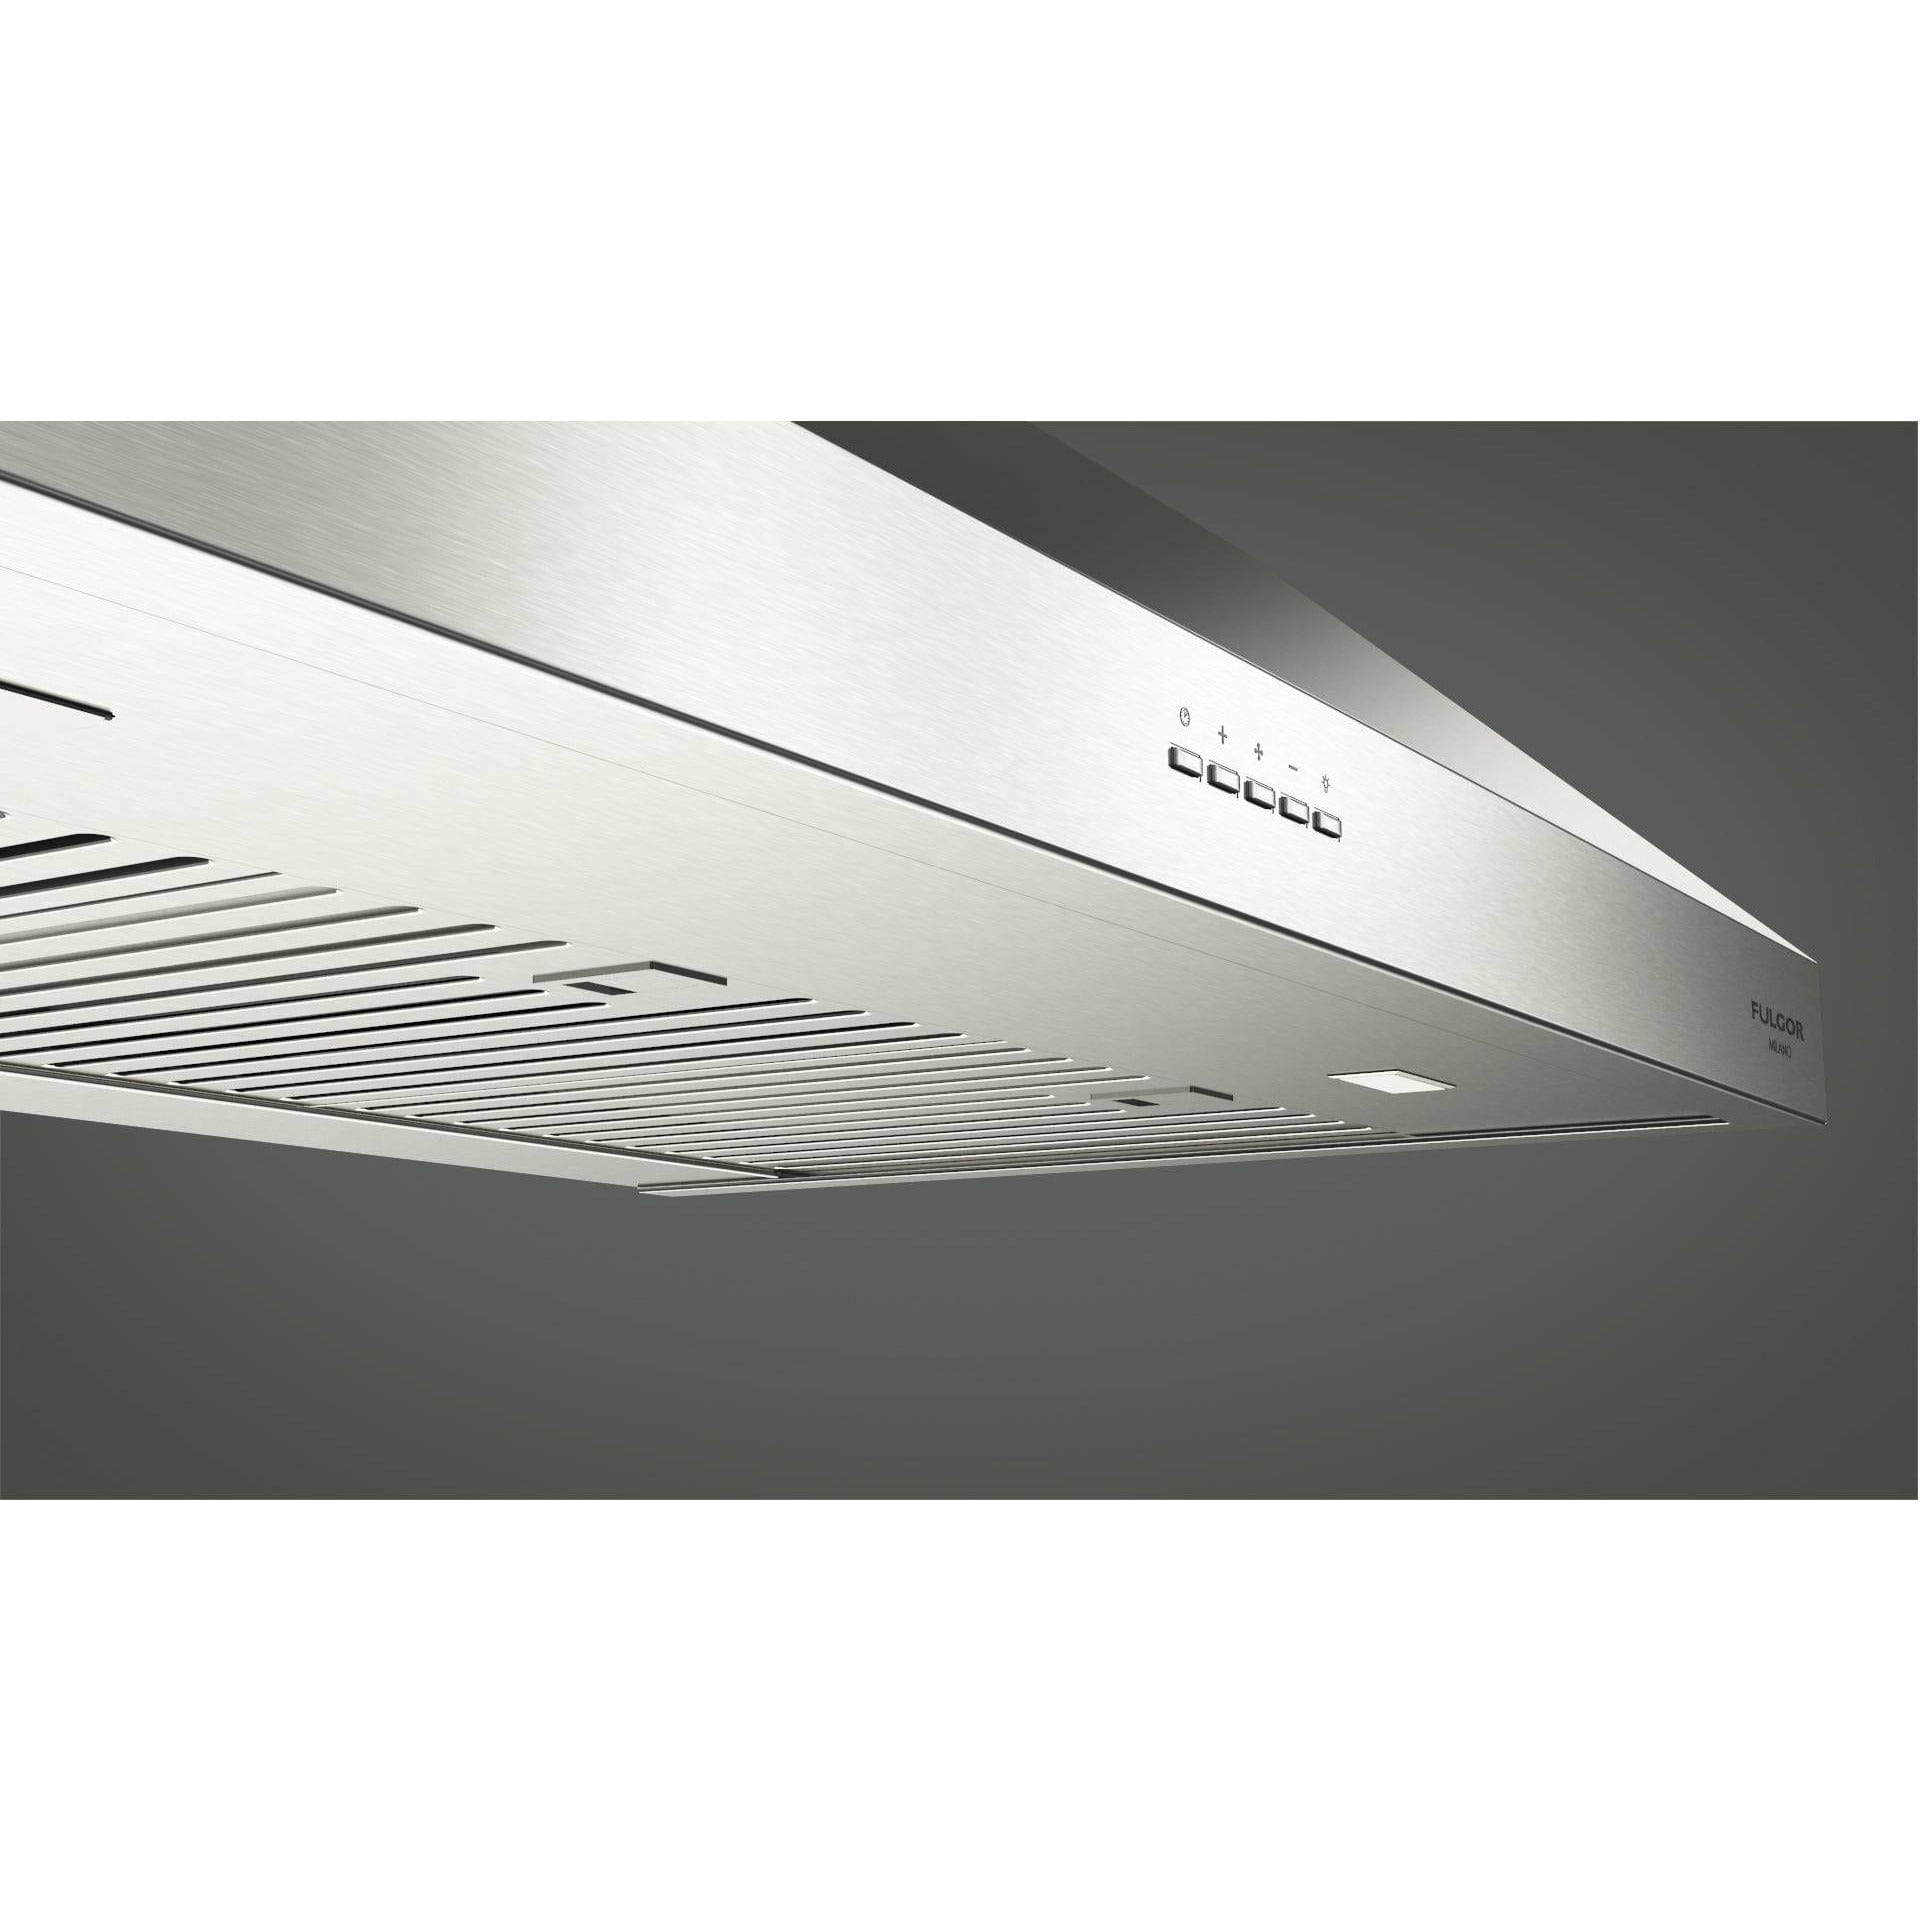 Fulgor Milano 36" Under Cabinet Range Hood with 4-Speed/450 CFM Blower, Stainless Steel - F4UC36S1 Hoods F4UC36S1 Luxury Appliances Direct